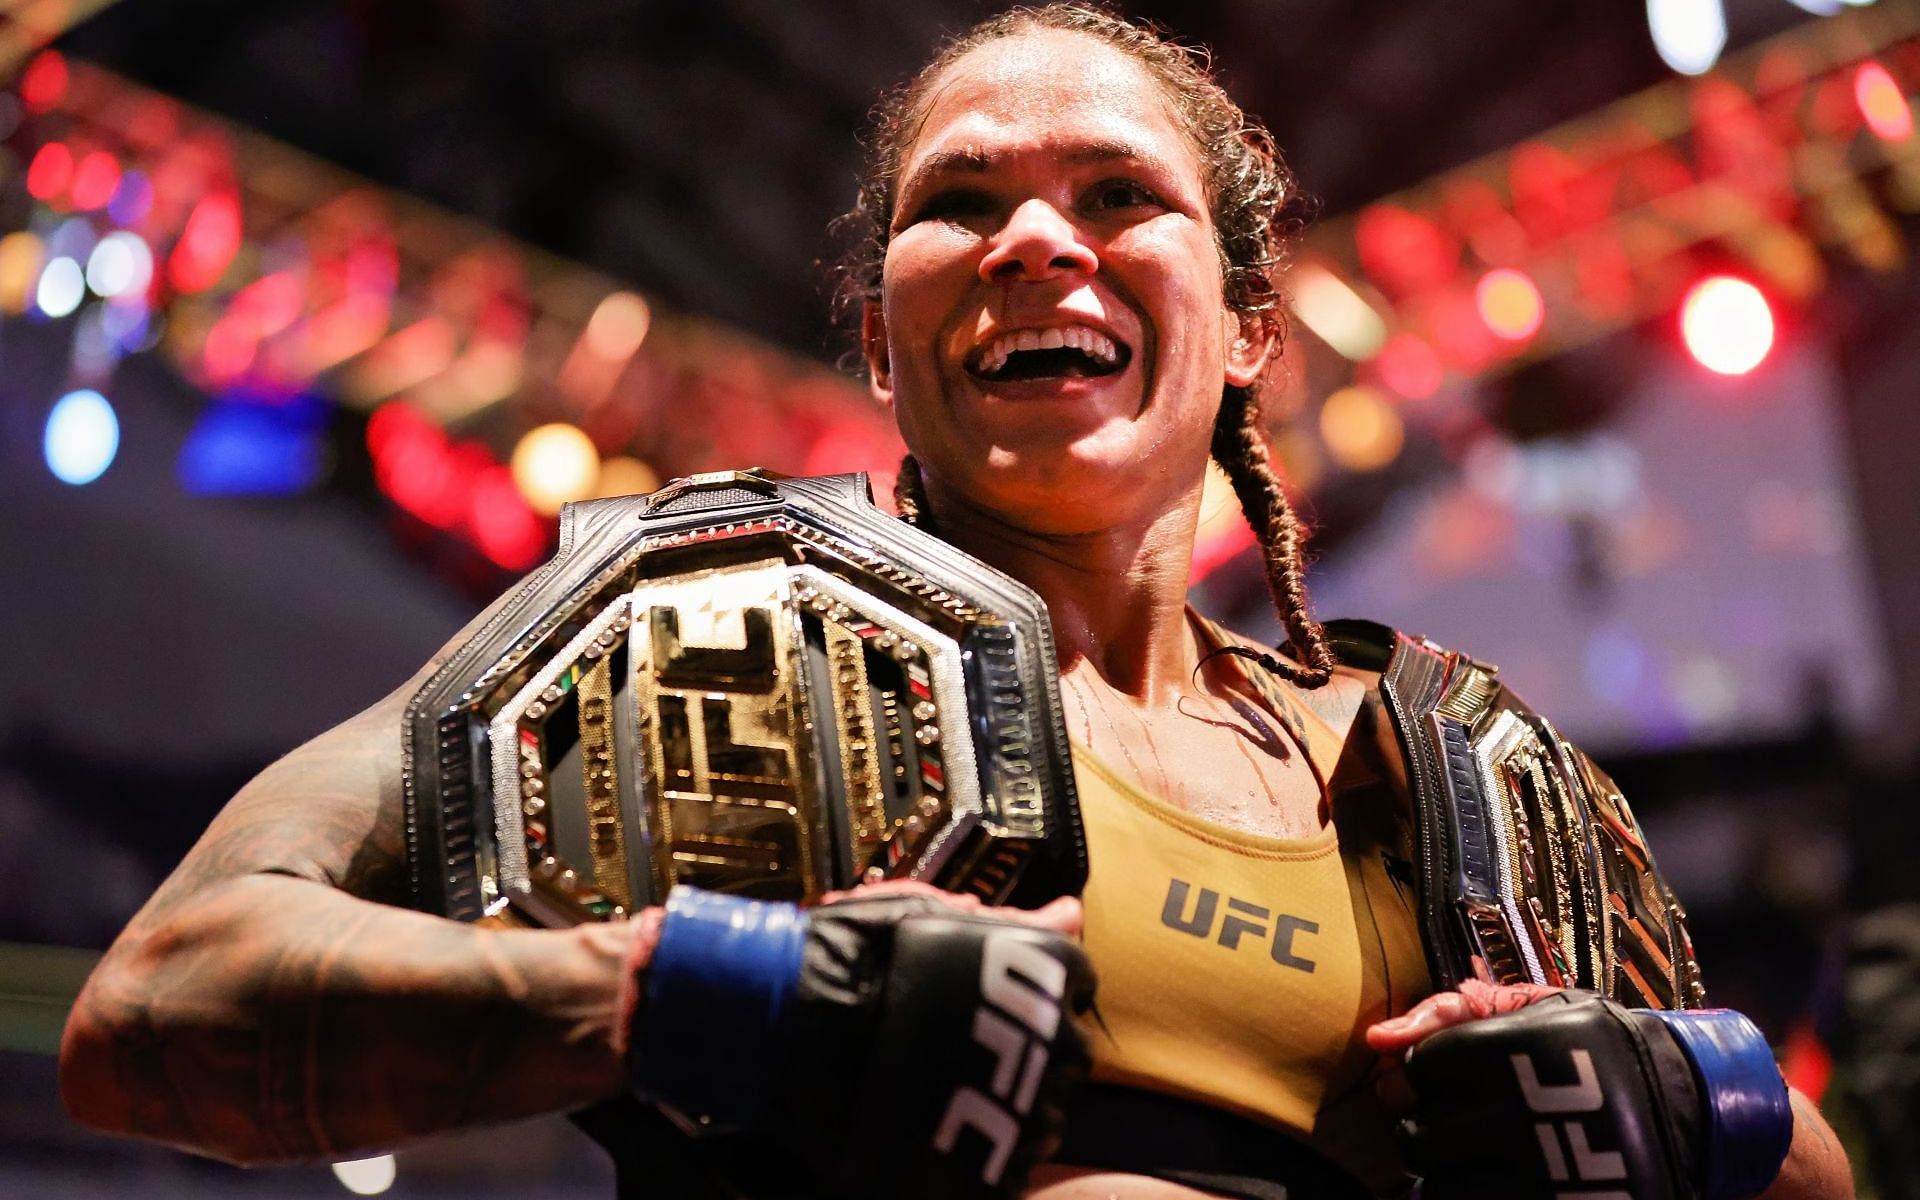 Amanda Nunes is widely regarded as the greatest female fighter of all time